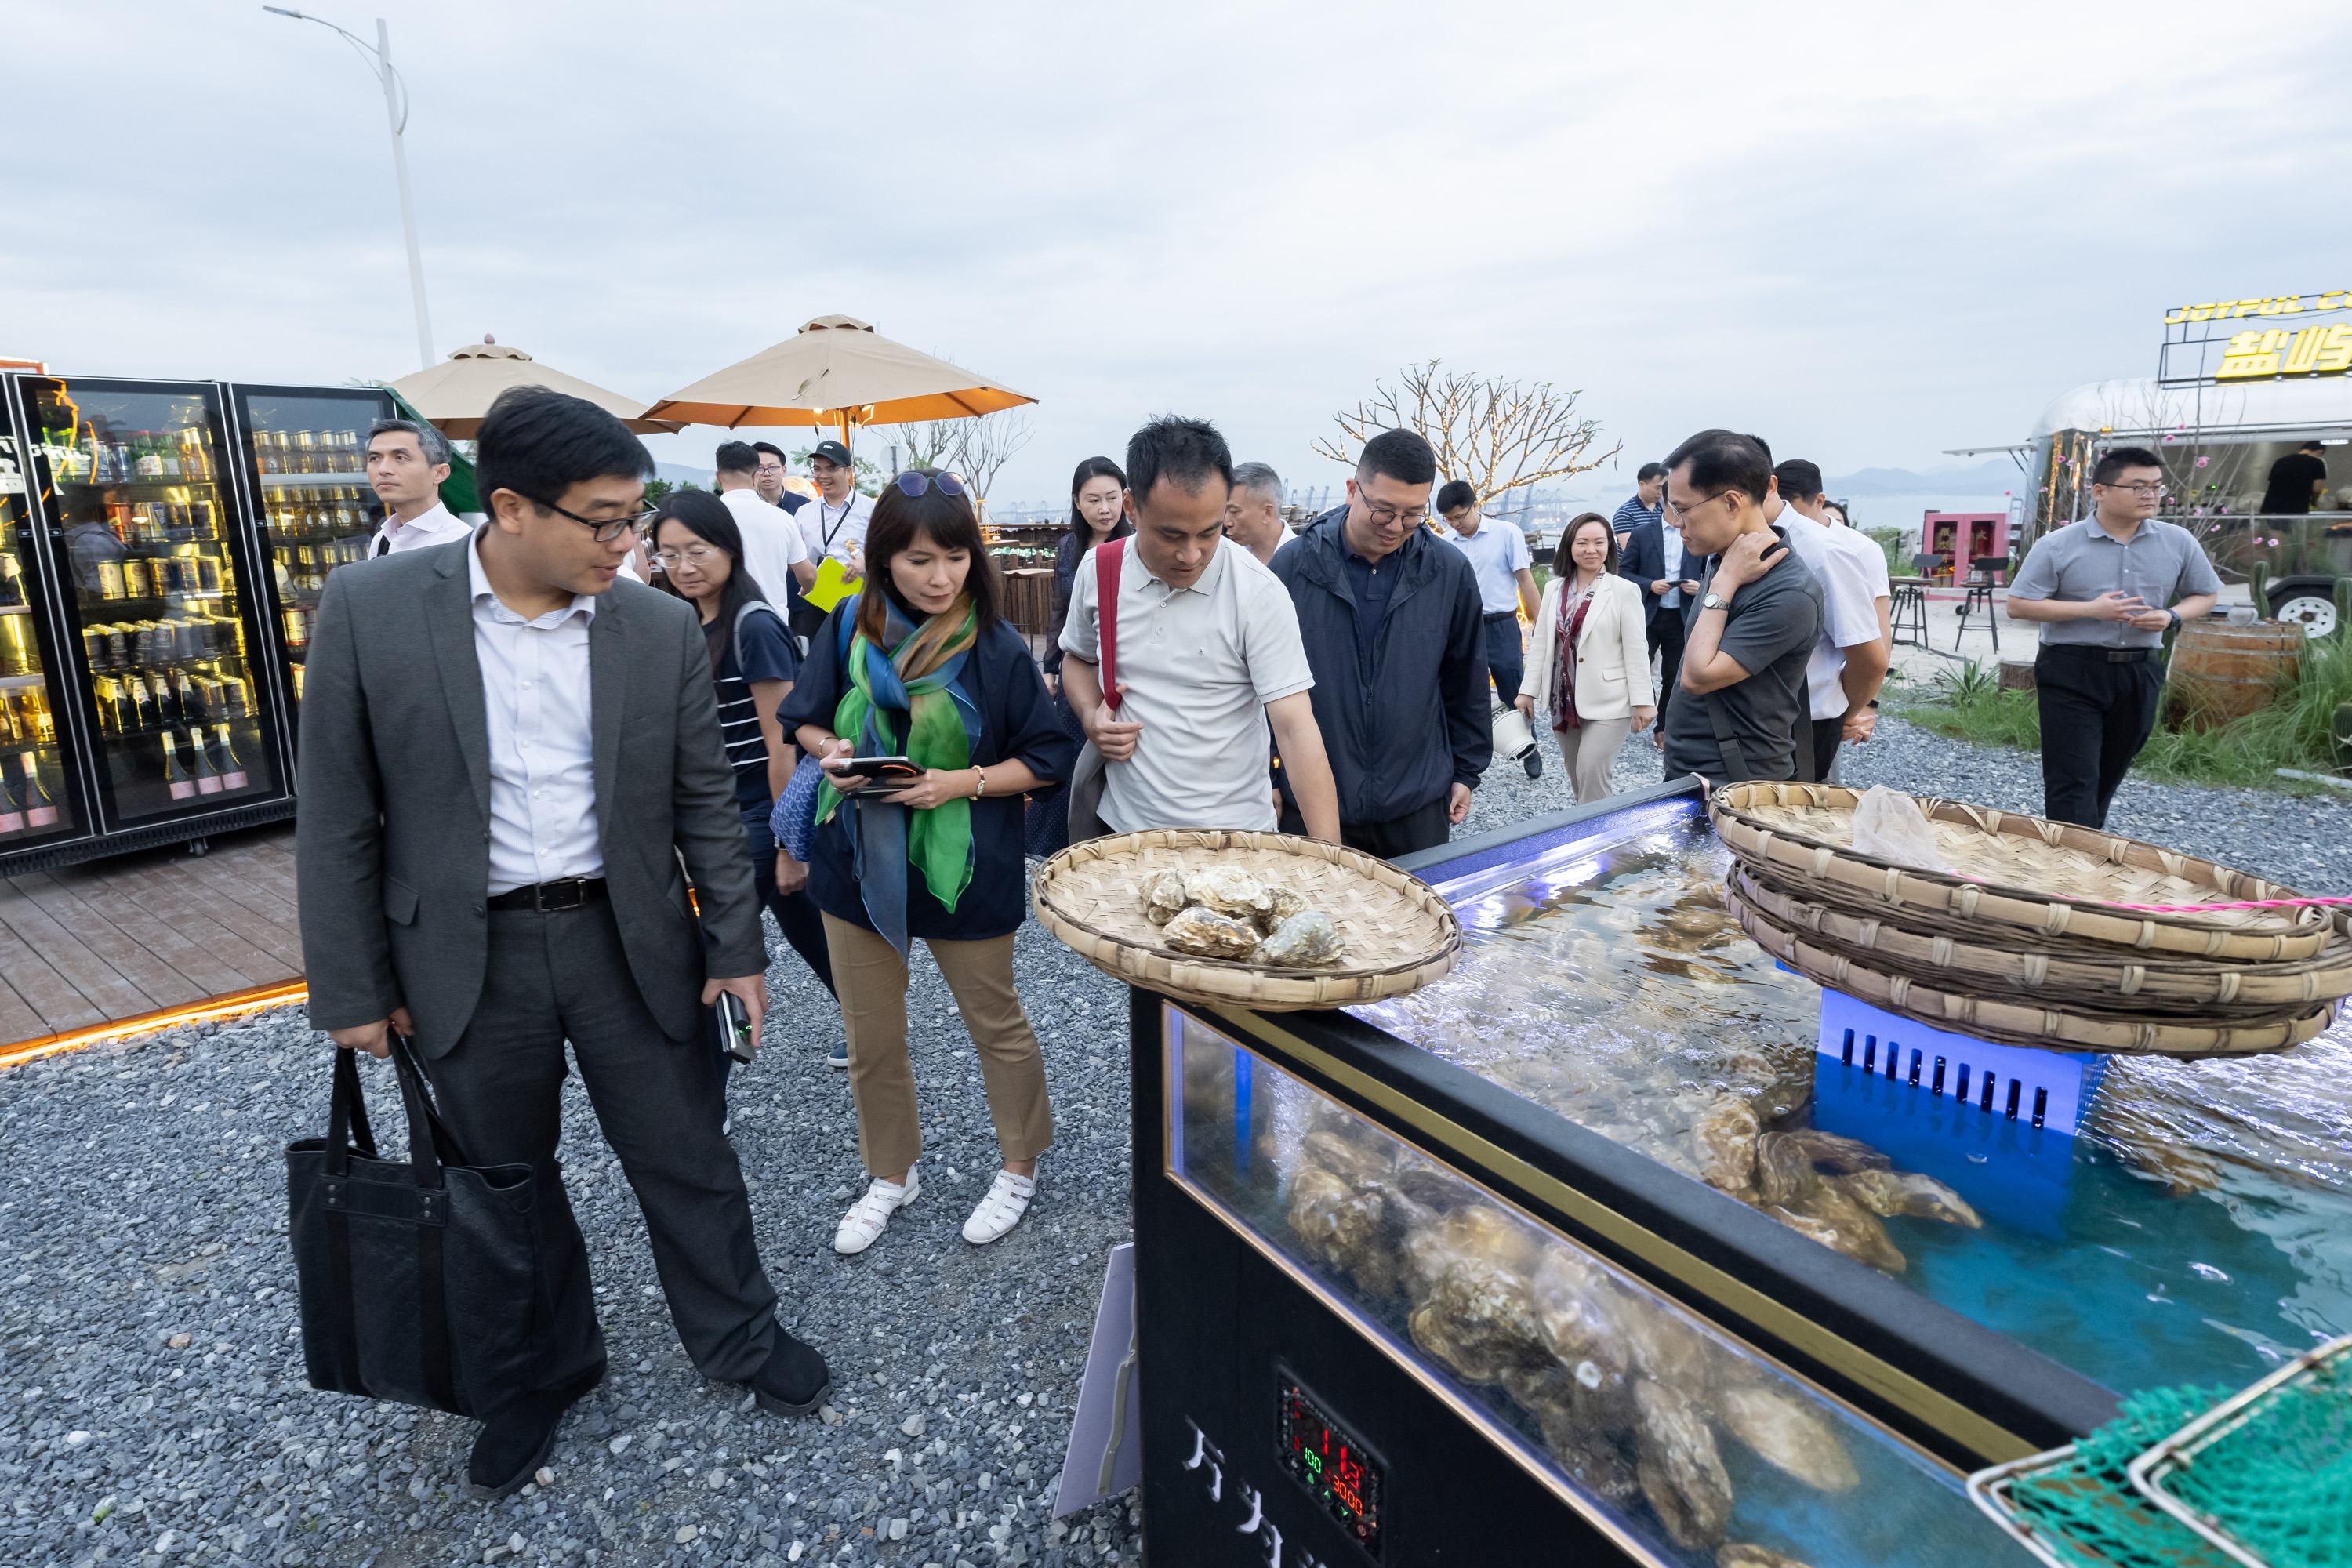 The Legislative Council Subcommittee on Matters Relating to the Development of the Northern Metropolis visits Shenzhen to examine development of eco-tourism today (May 9). Photo shows Members learning about the experience in hosting cross-border food festivals at Yantian Harbour Night Market.
